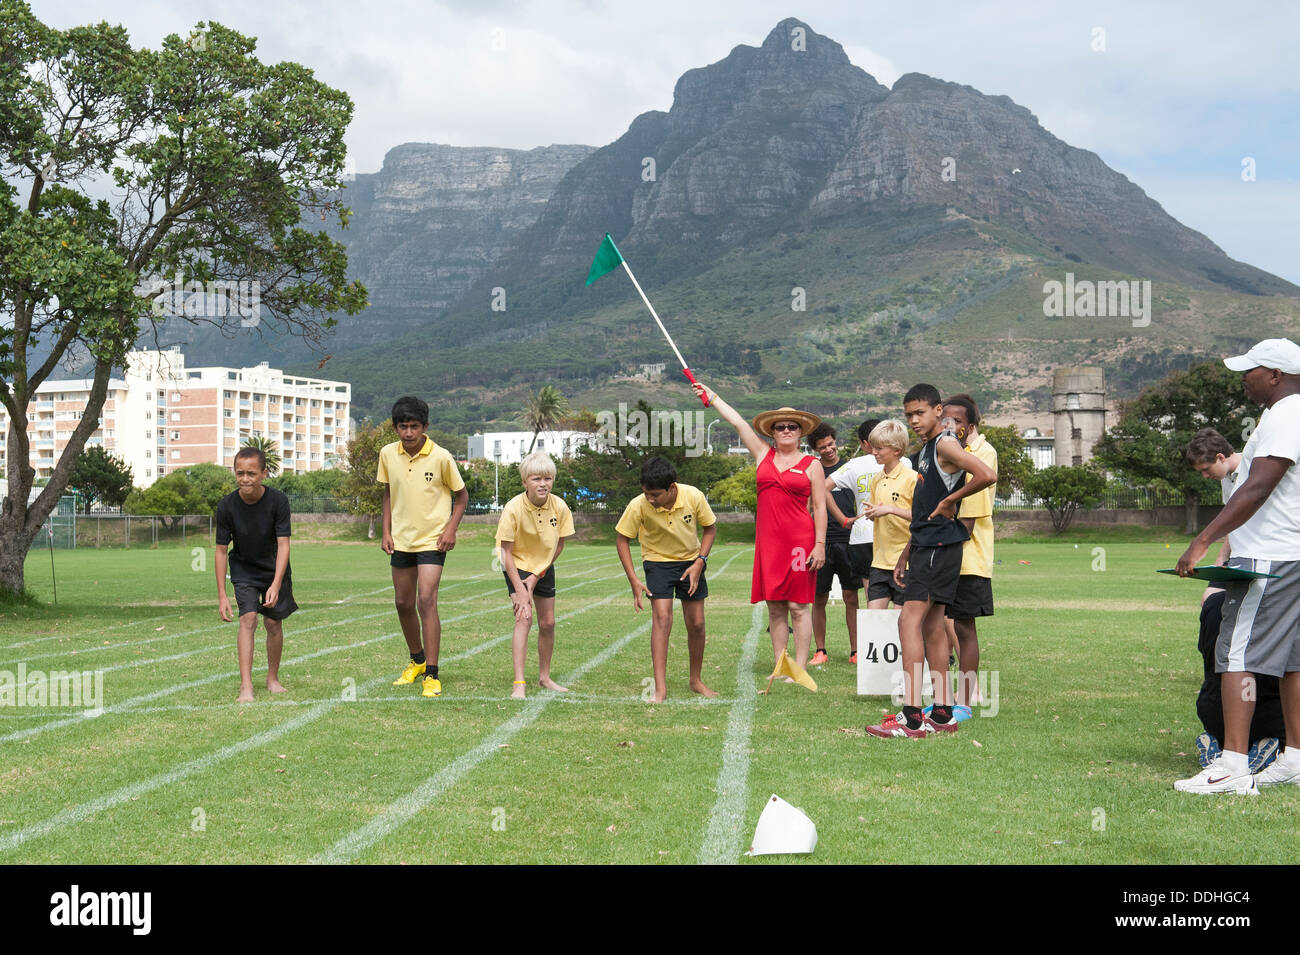 Start of a running competition at St. George's School, Cape Town, South Africa Stock Photo